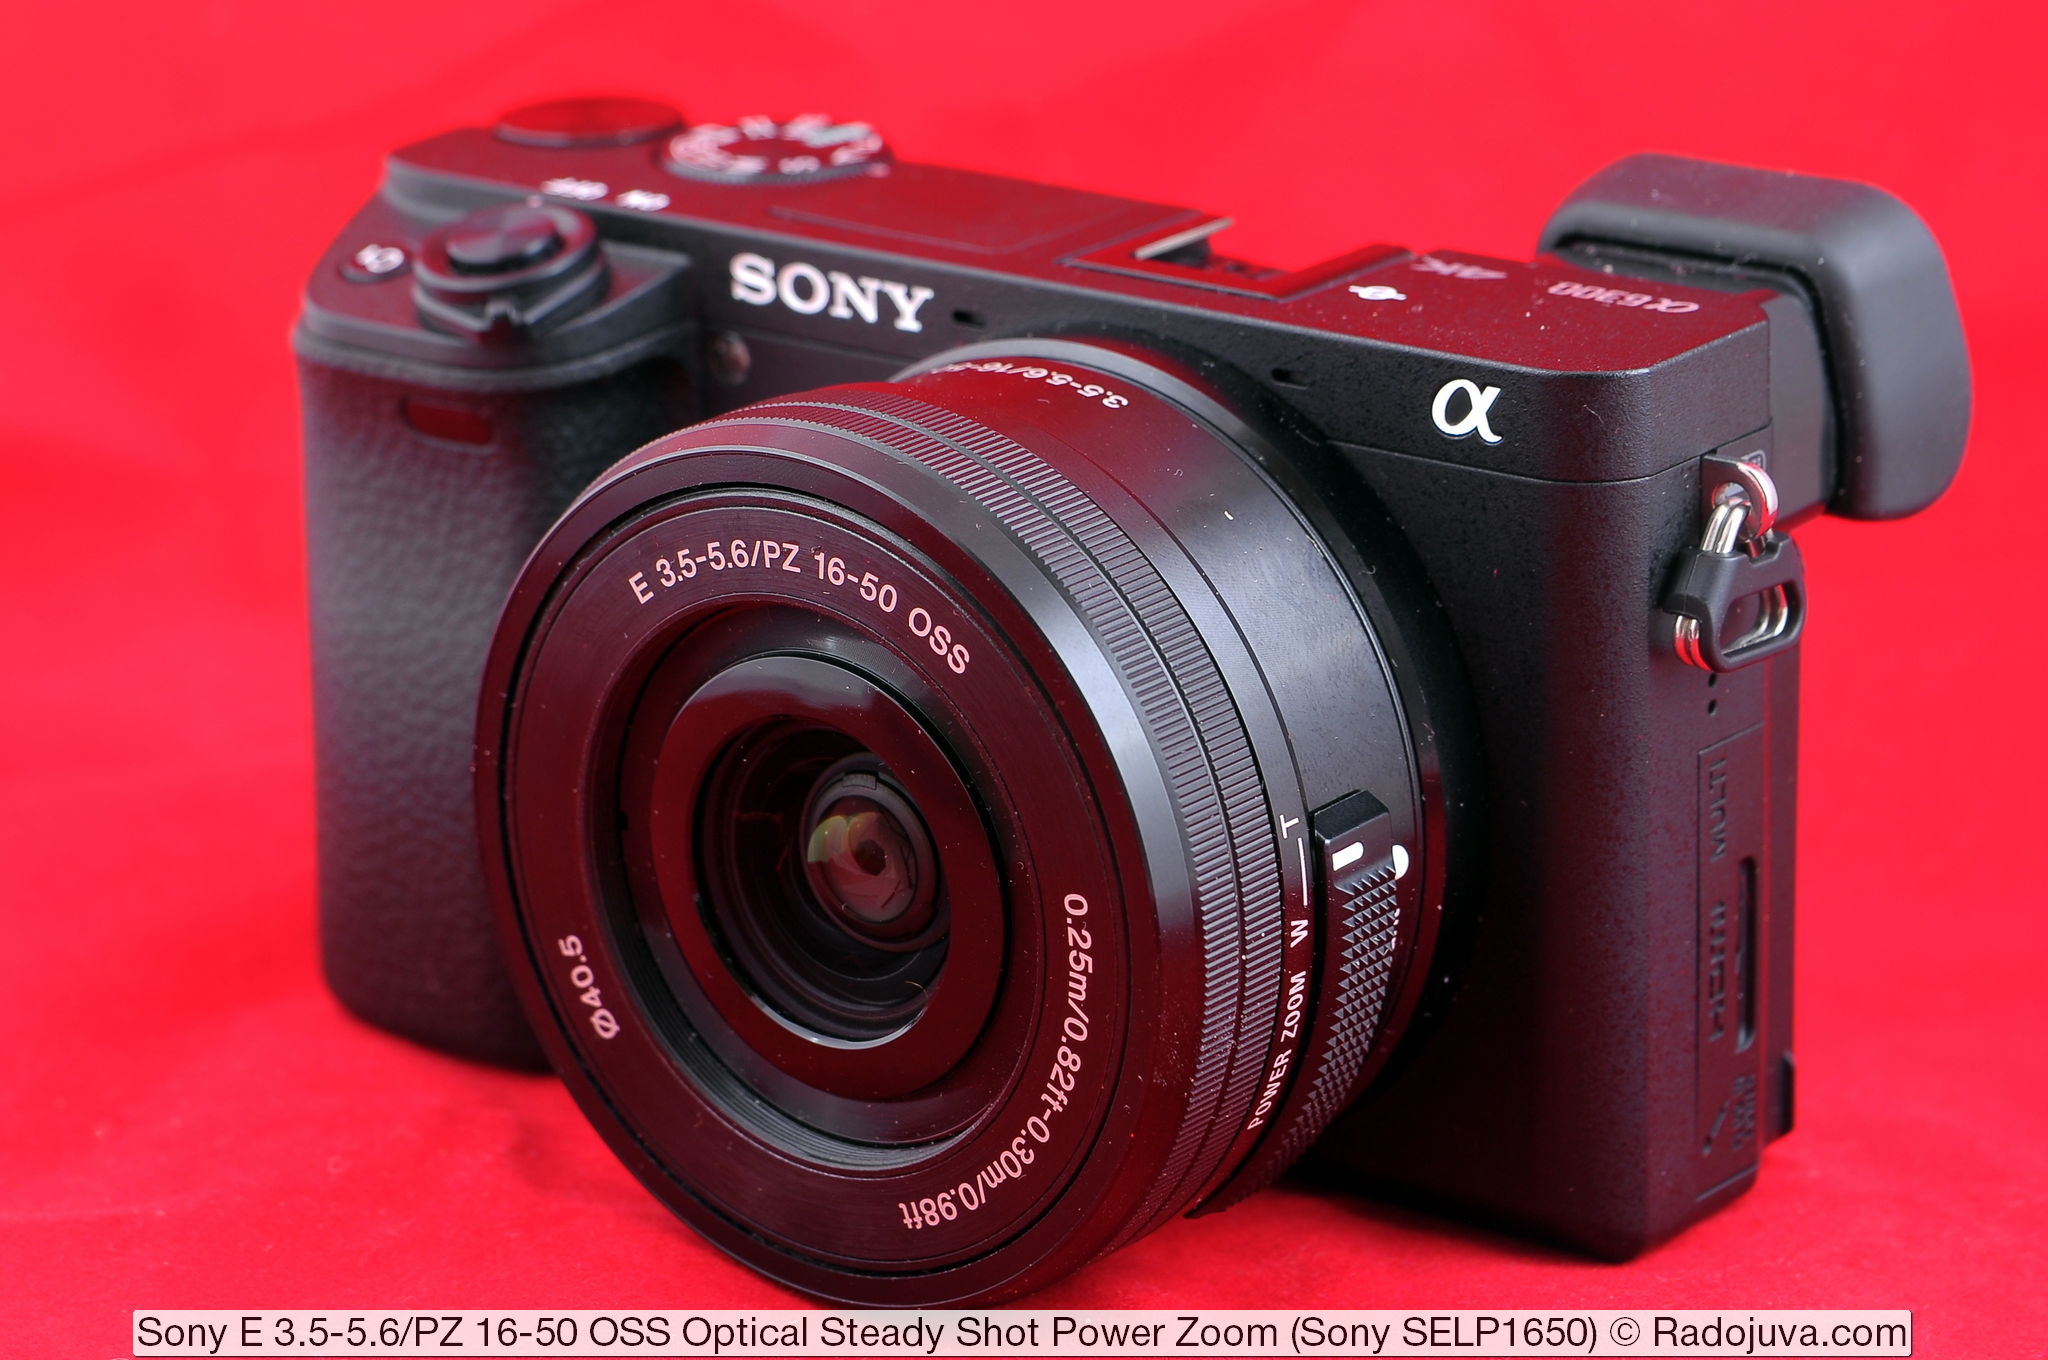 Sony E 3.5-5.6 / PZ 16-50 OSS Optical Steady Shot Power Zoom (Sony SELP1650). The lens is shown on a Sony a6300 mirrorless camera (ILCE-6300).